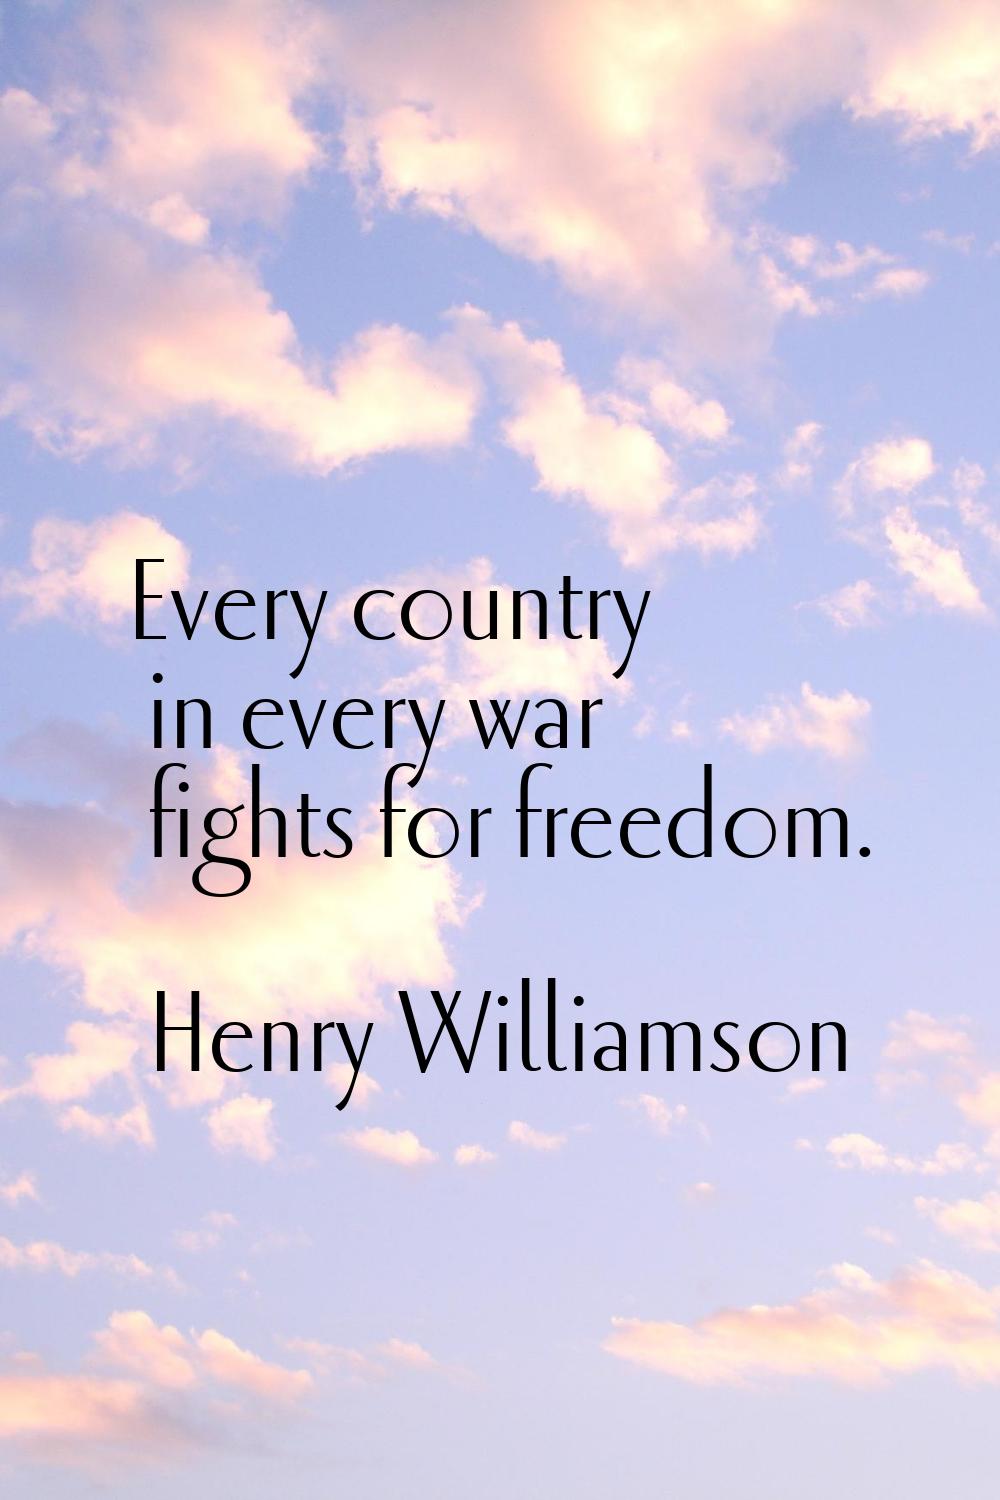 Every country in every war fights for freedom.